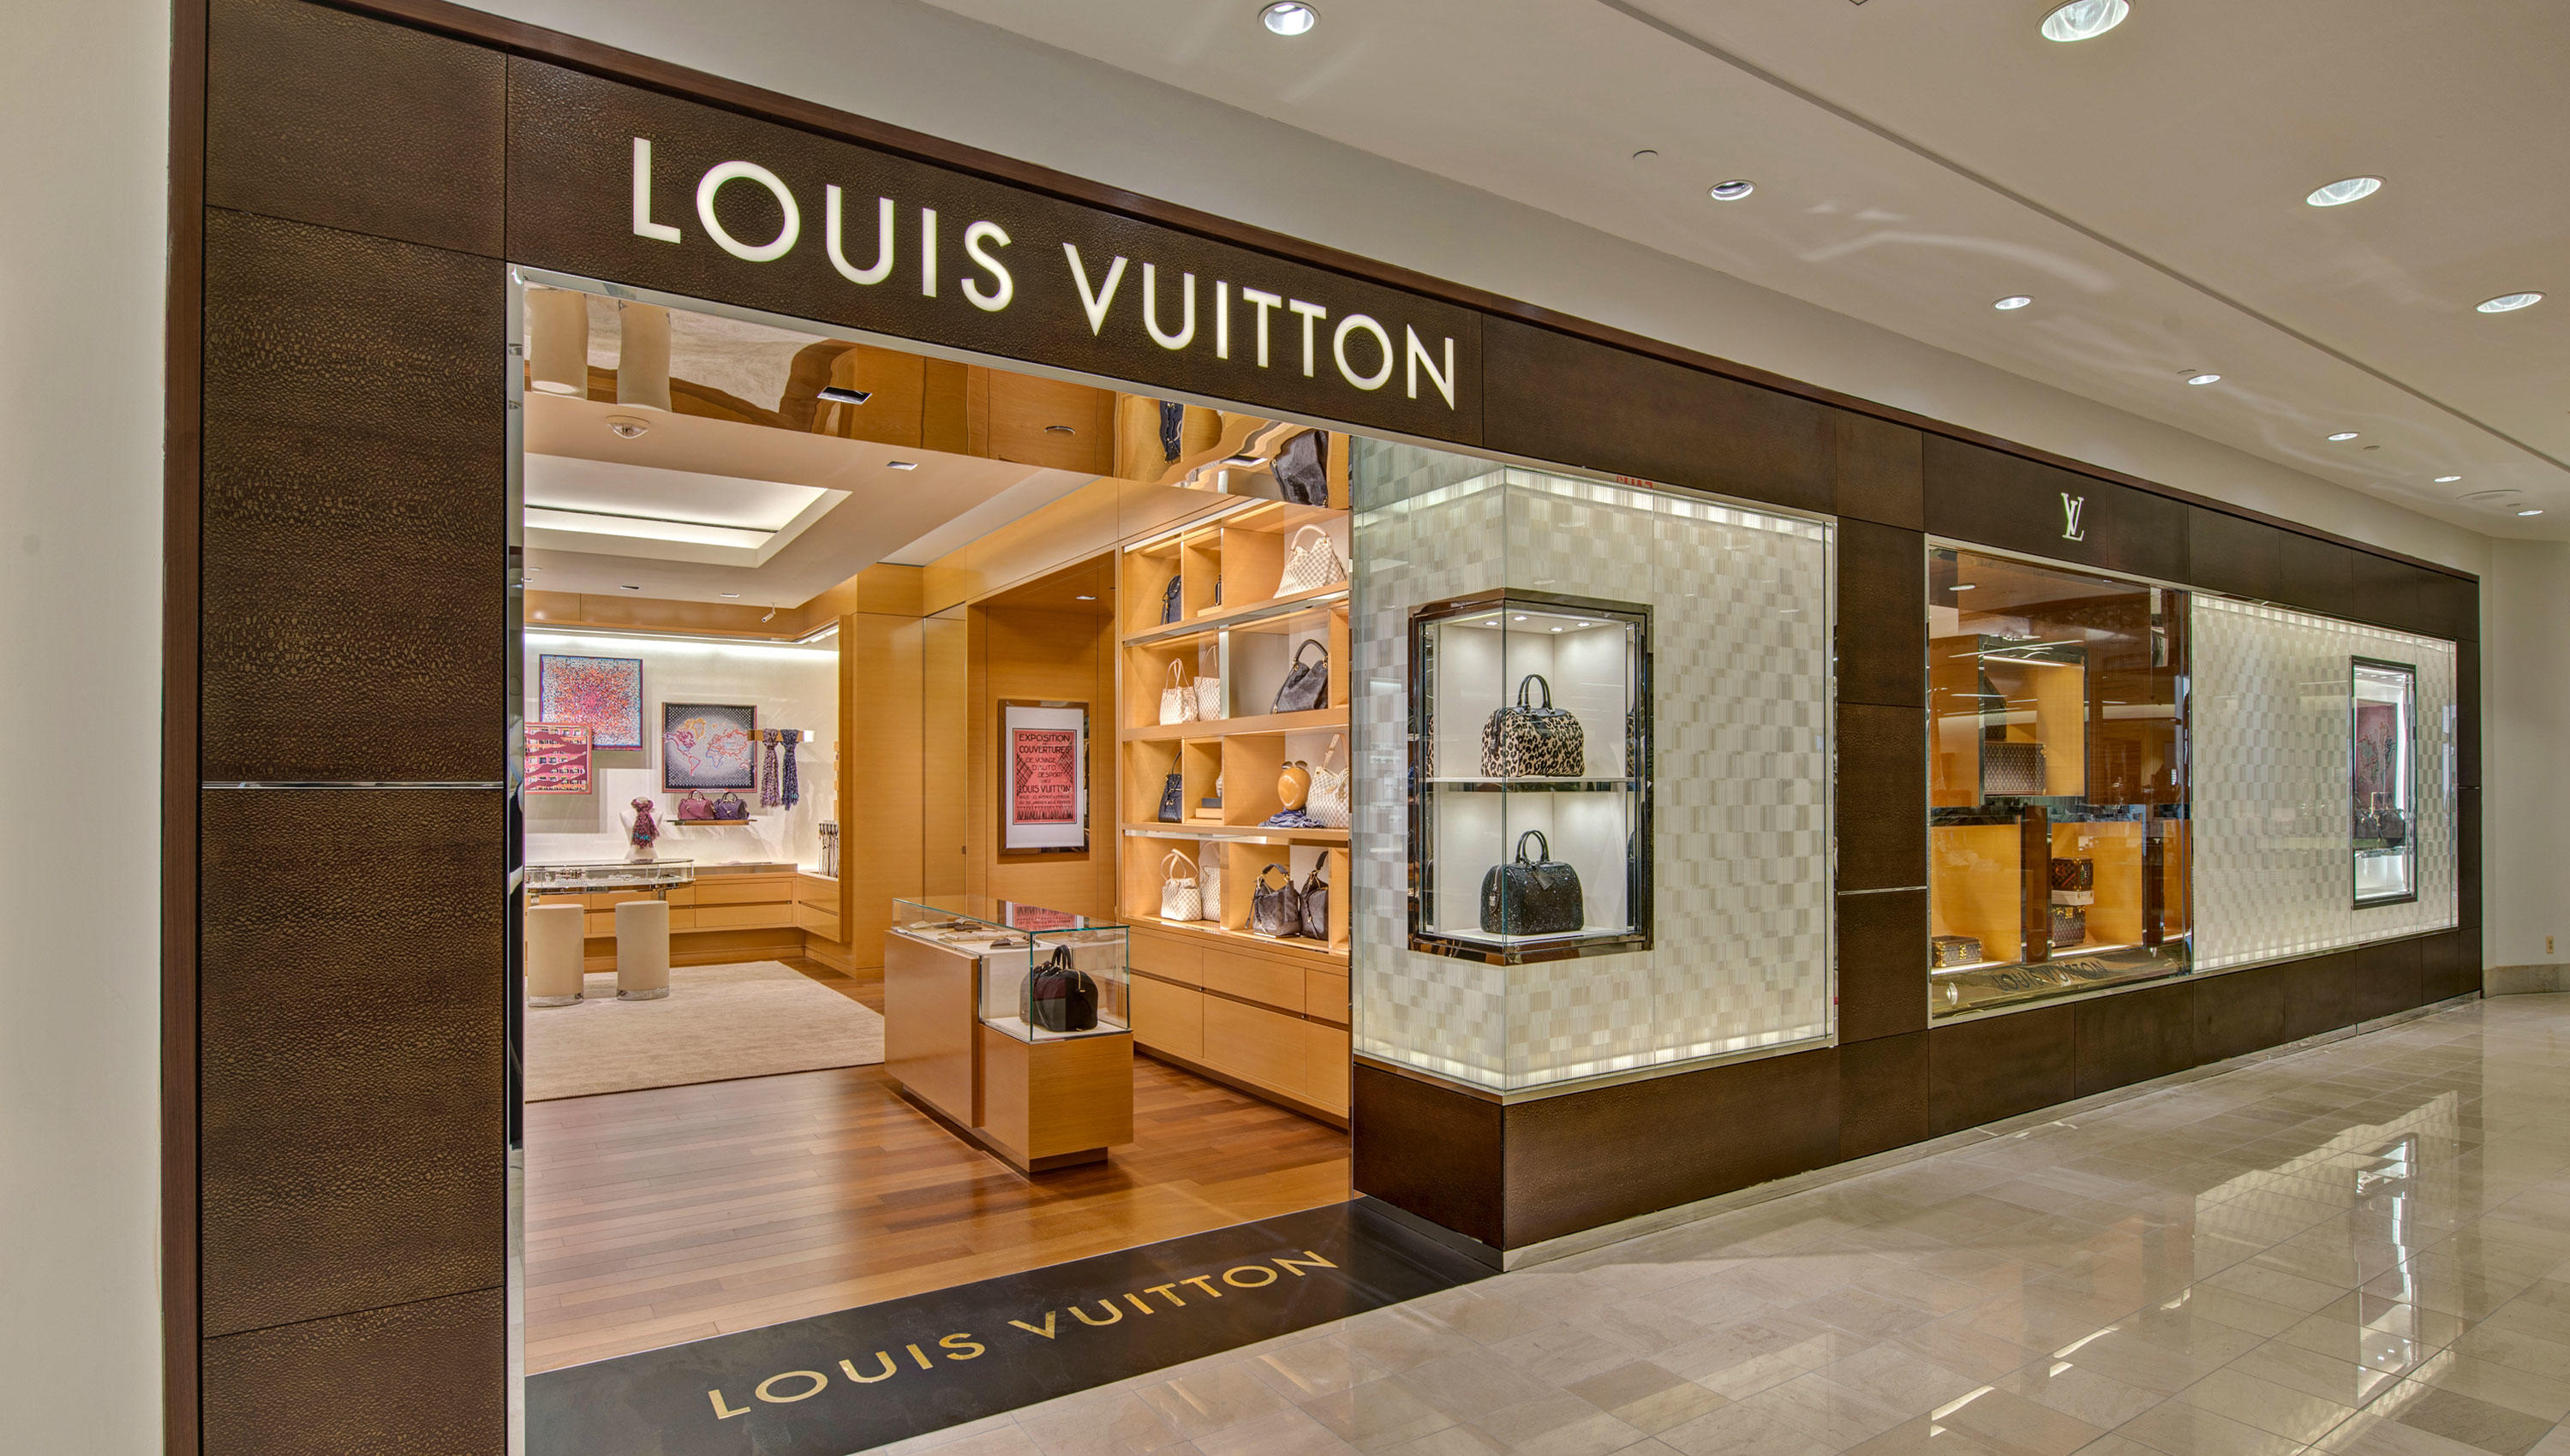 Louis Vuitton Troy Saks Coupons near me in Troy, MI 48084 | 8coupons